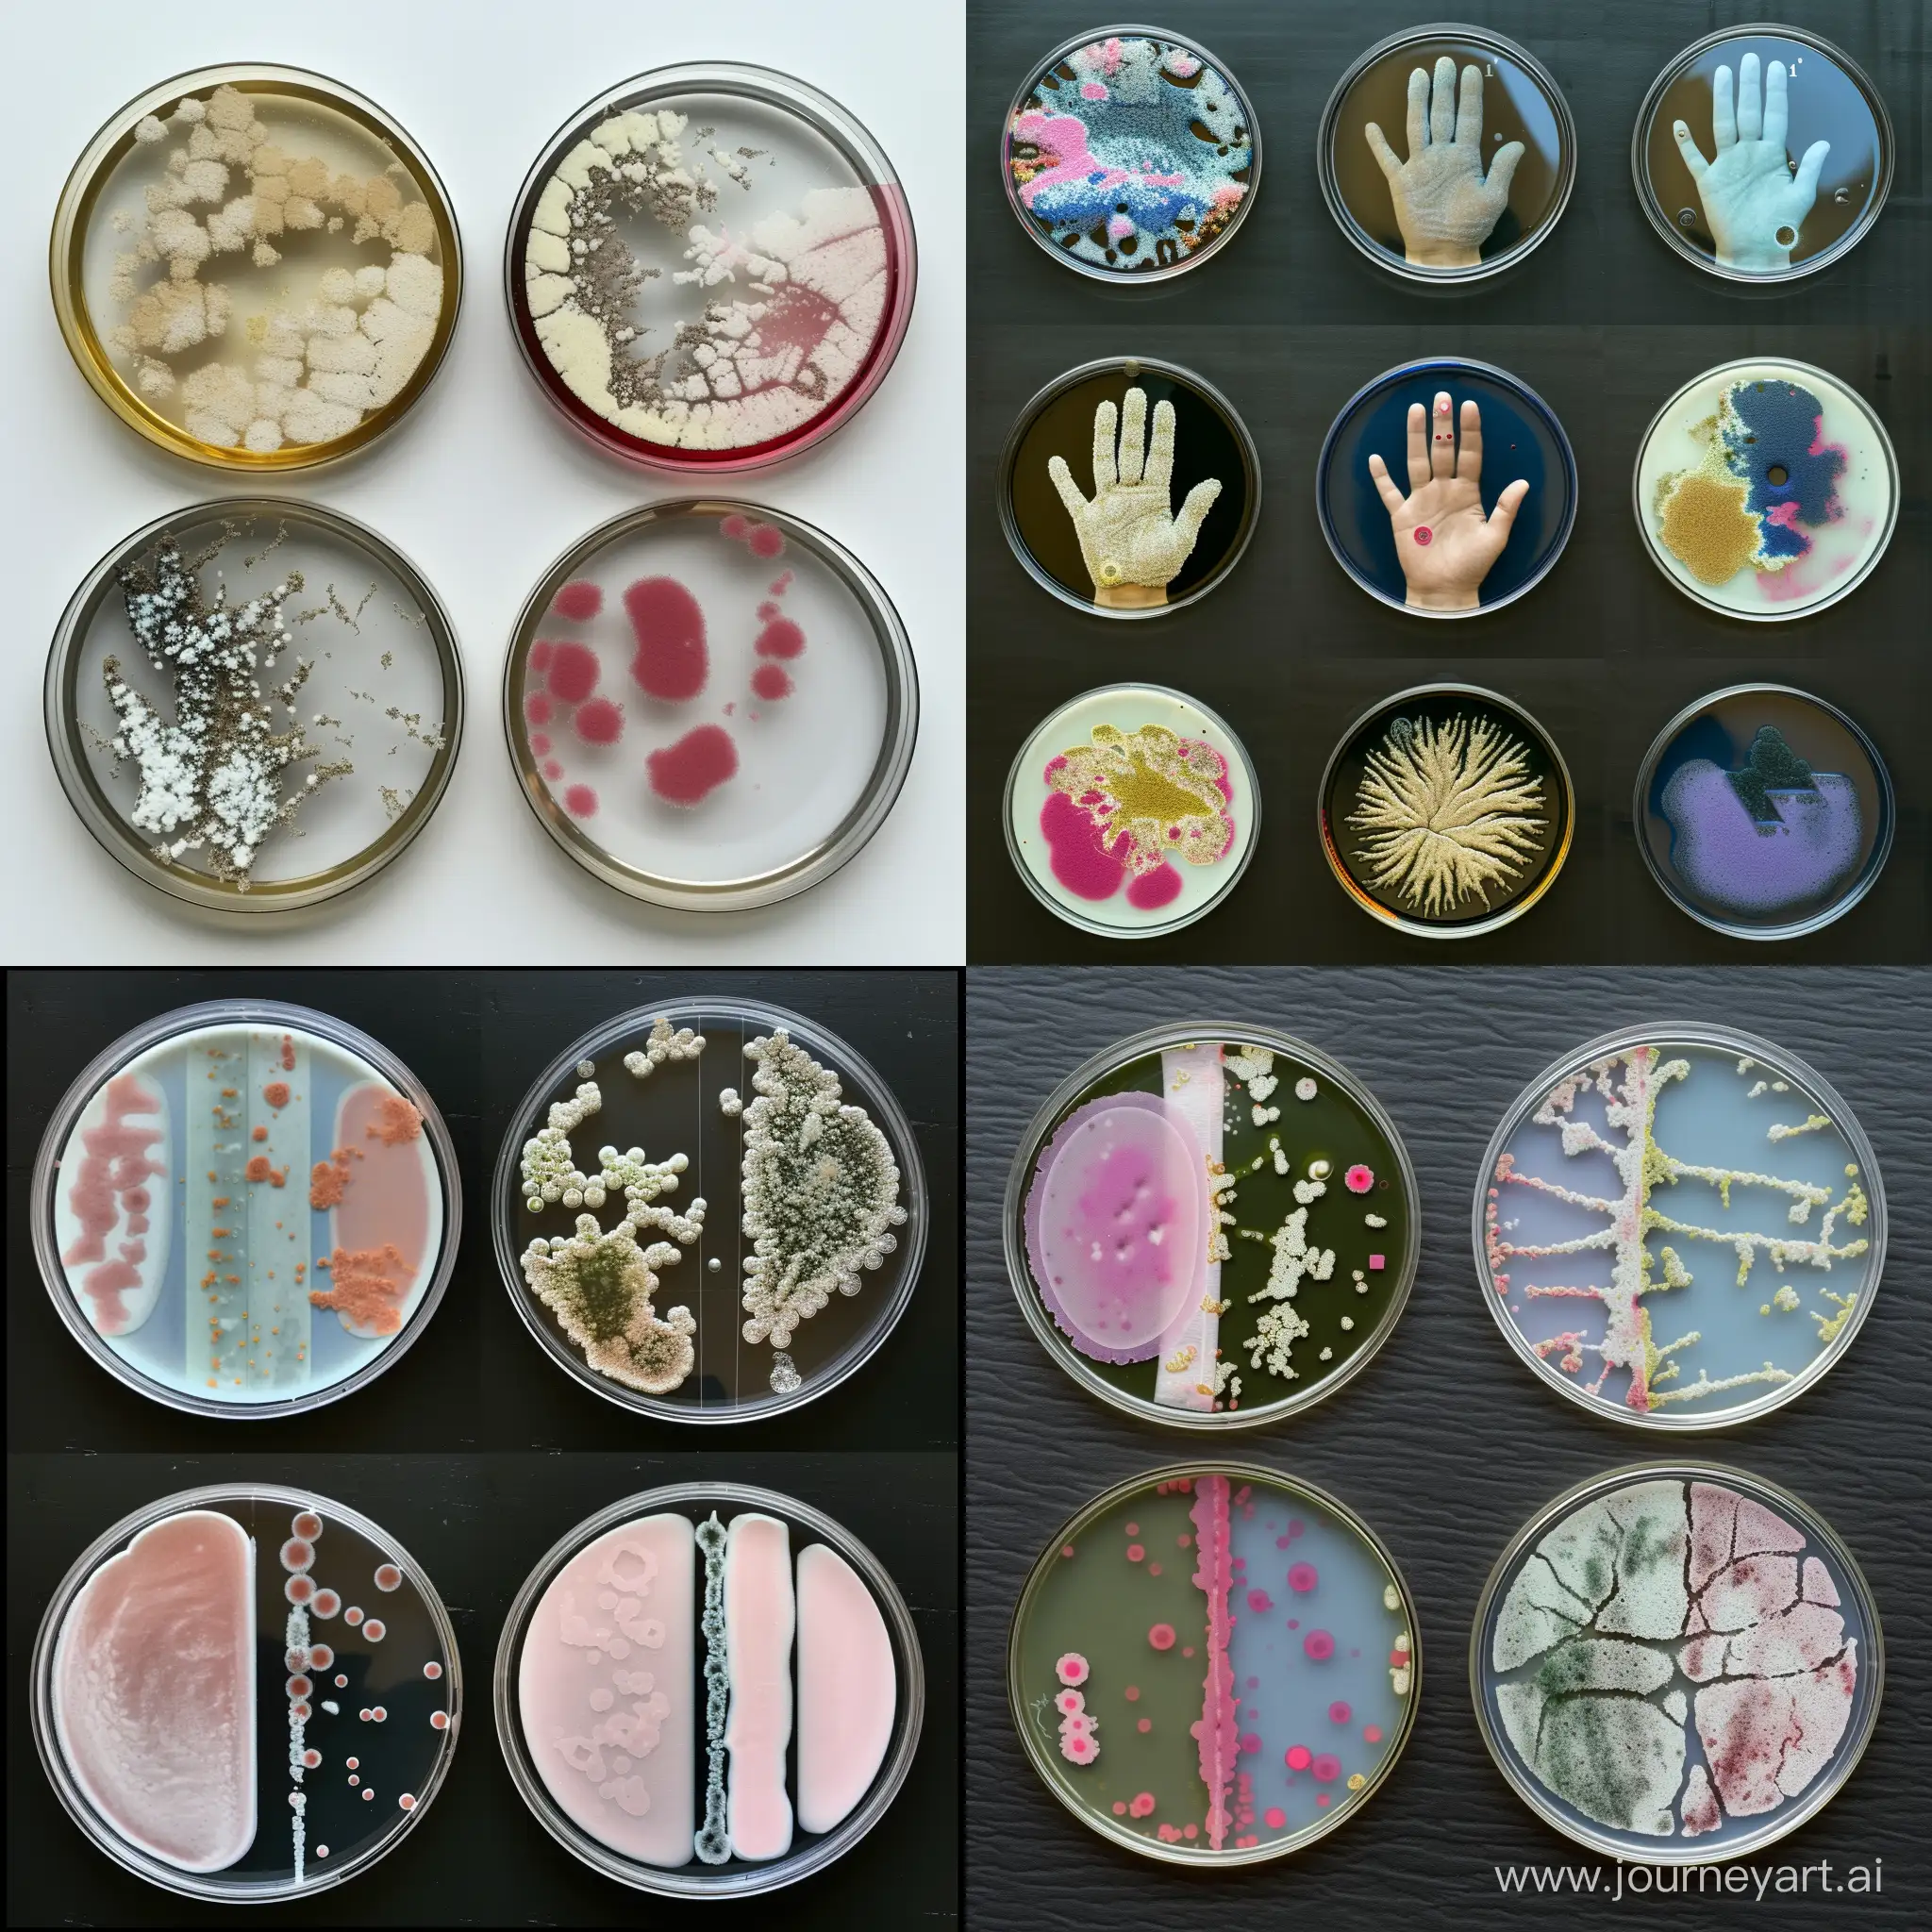 Petri-Dish-Cultures-Clean-vs-Contaminated-Substrates-Revealed